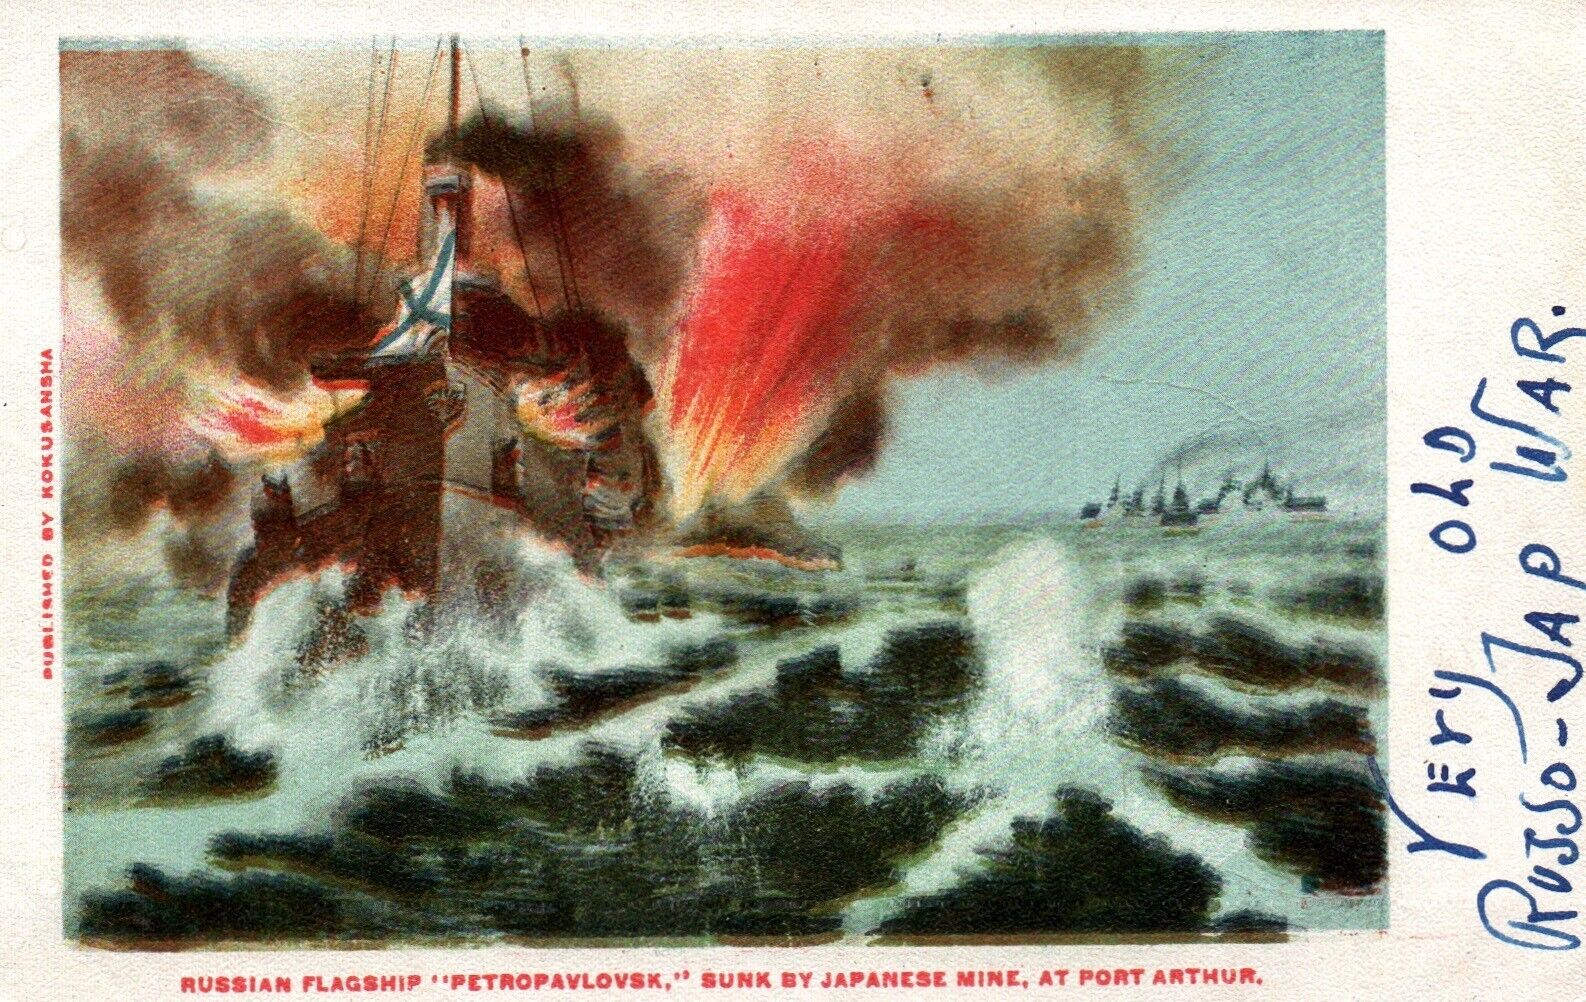 Rare Russo Japanese War Russian Flagship Sunk by Japanese Navy Mine Postcard